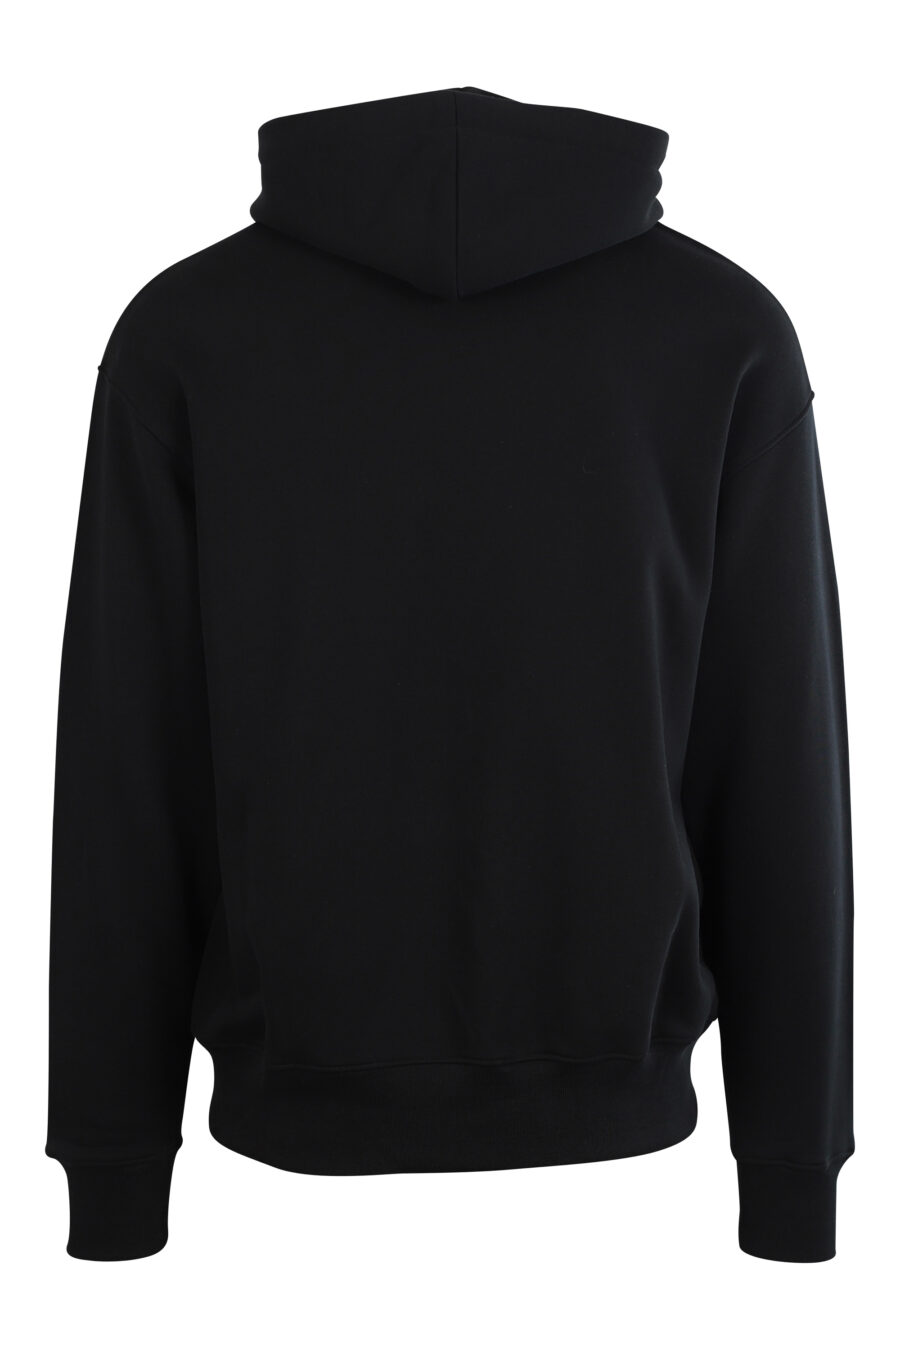 Black hooded sweatshirt with black and lilac face print - 889316192889 2